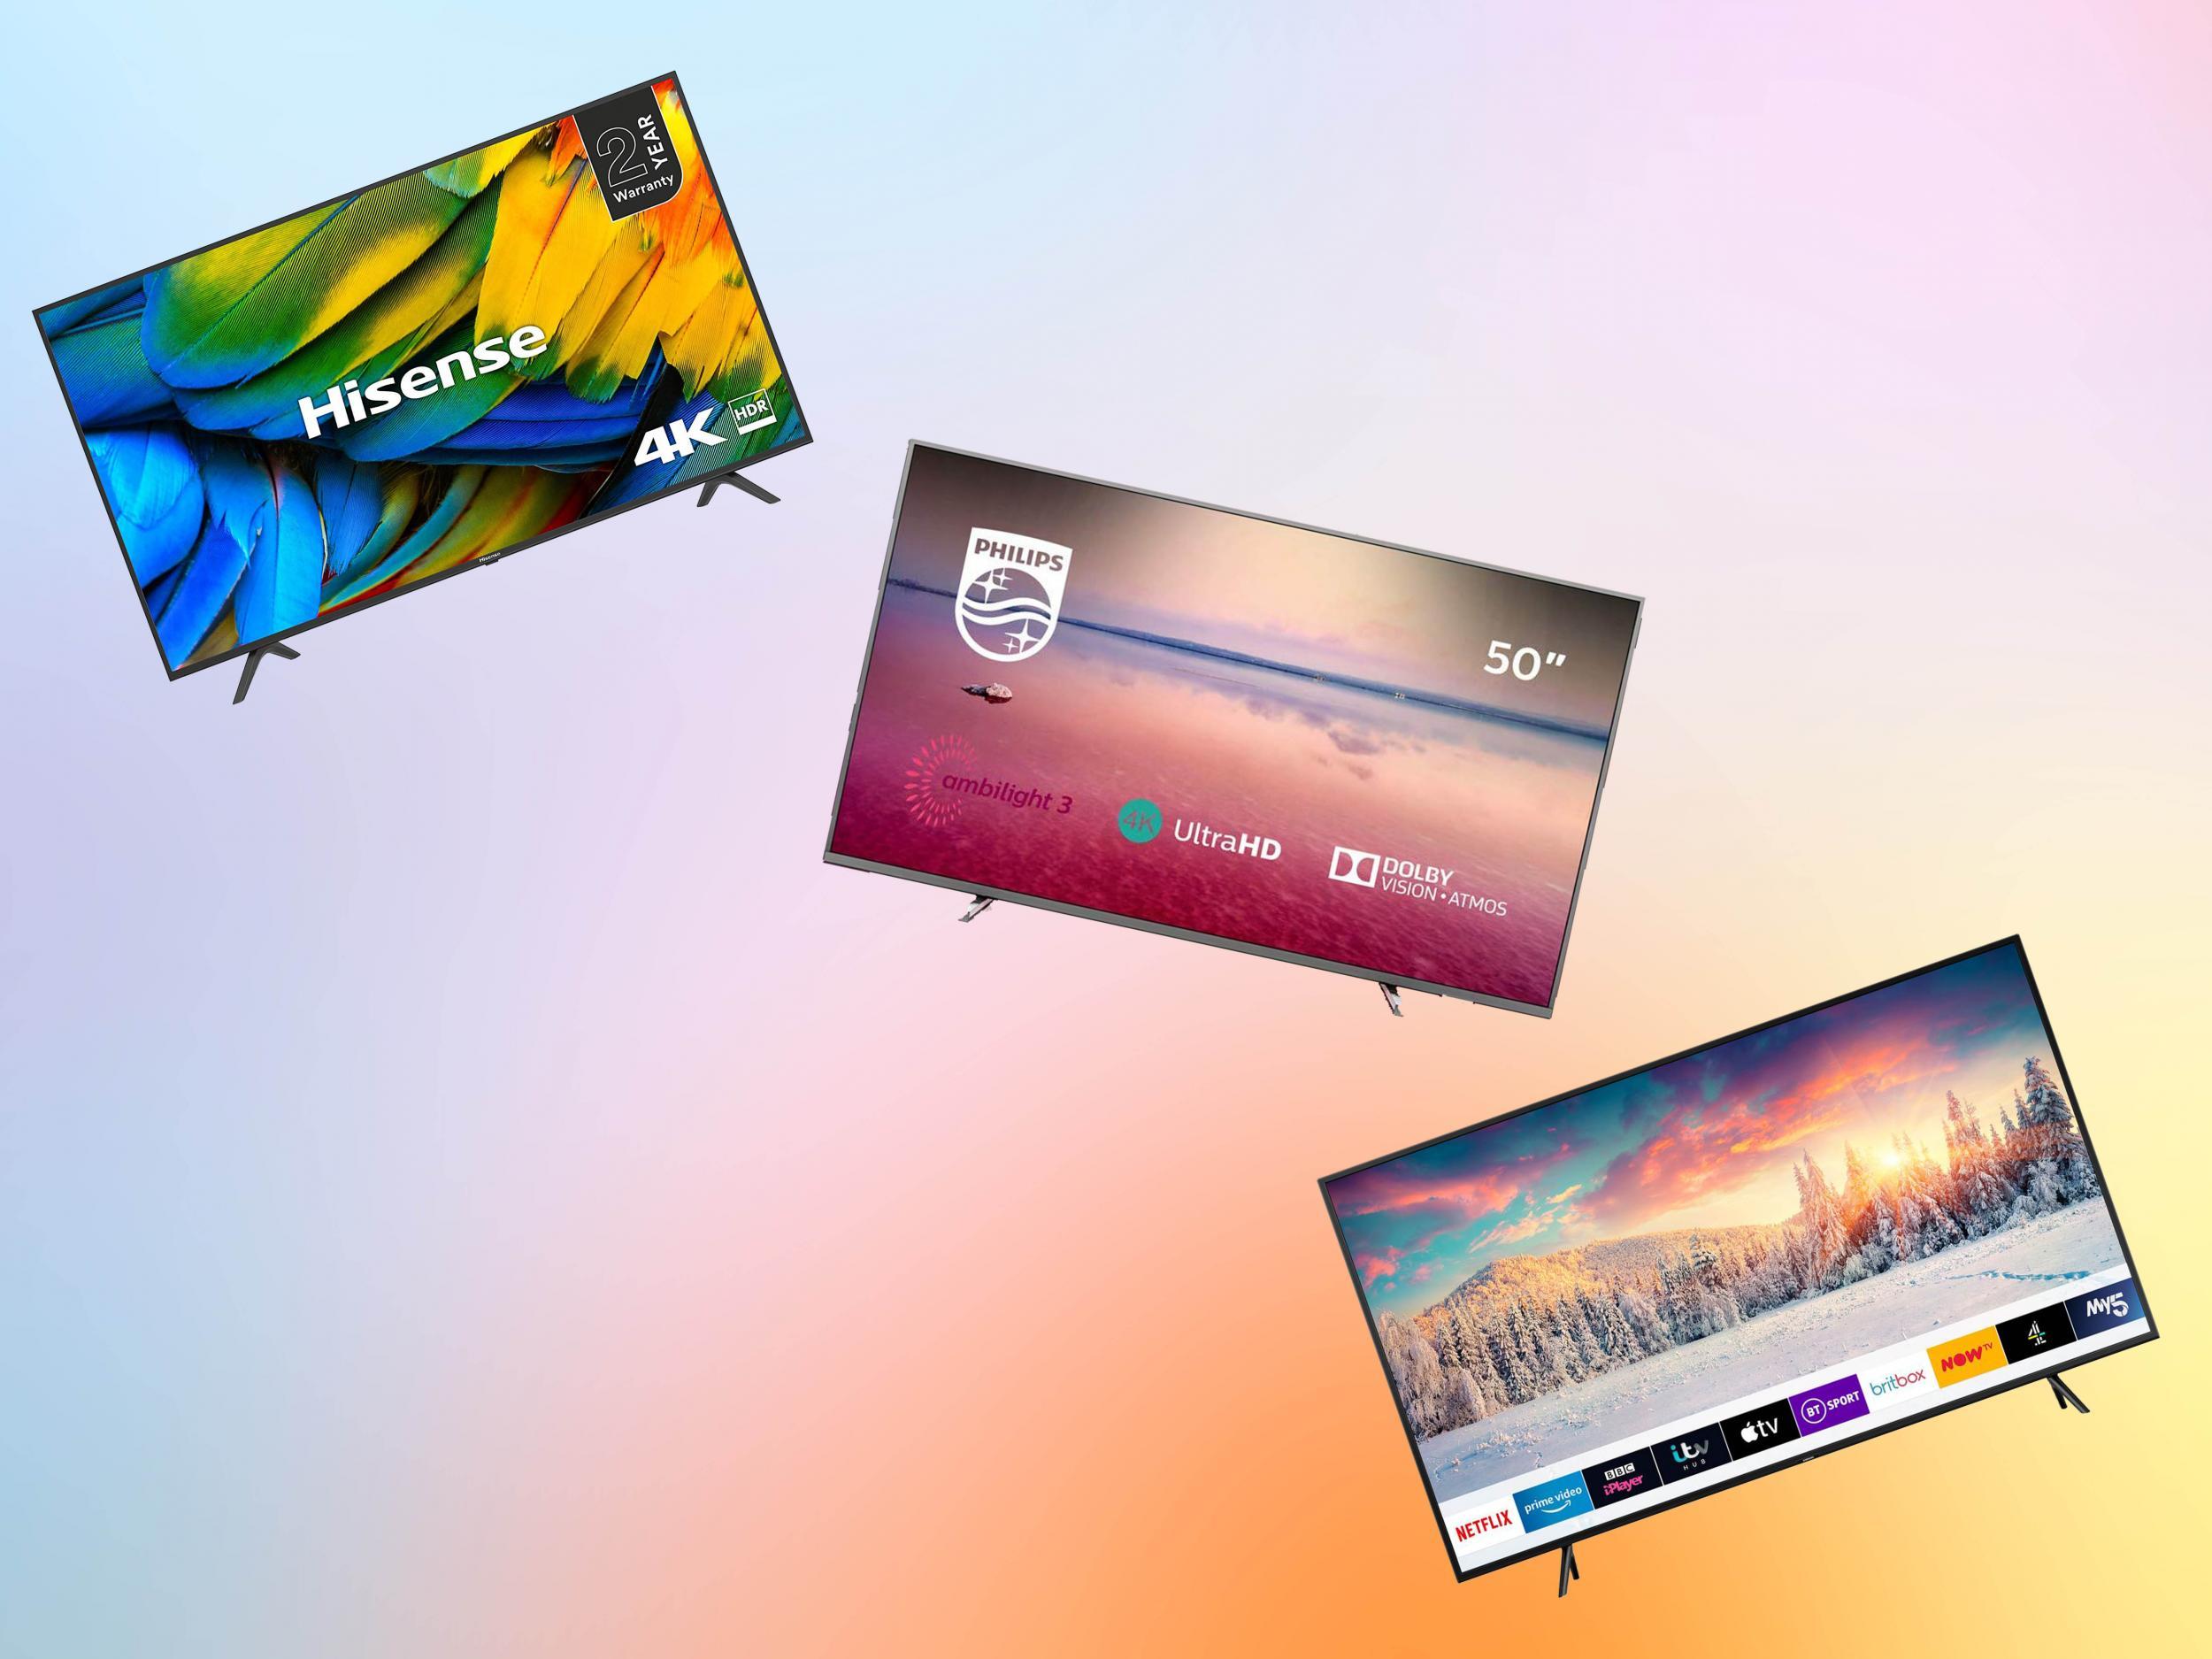 Cyber Monday TV deals 2019: The best offers from Currys PC World, Amazon and Argos